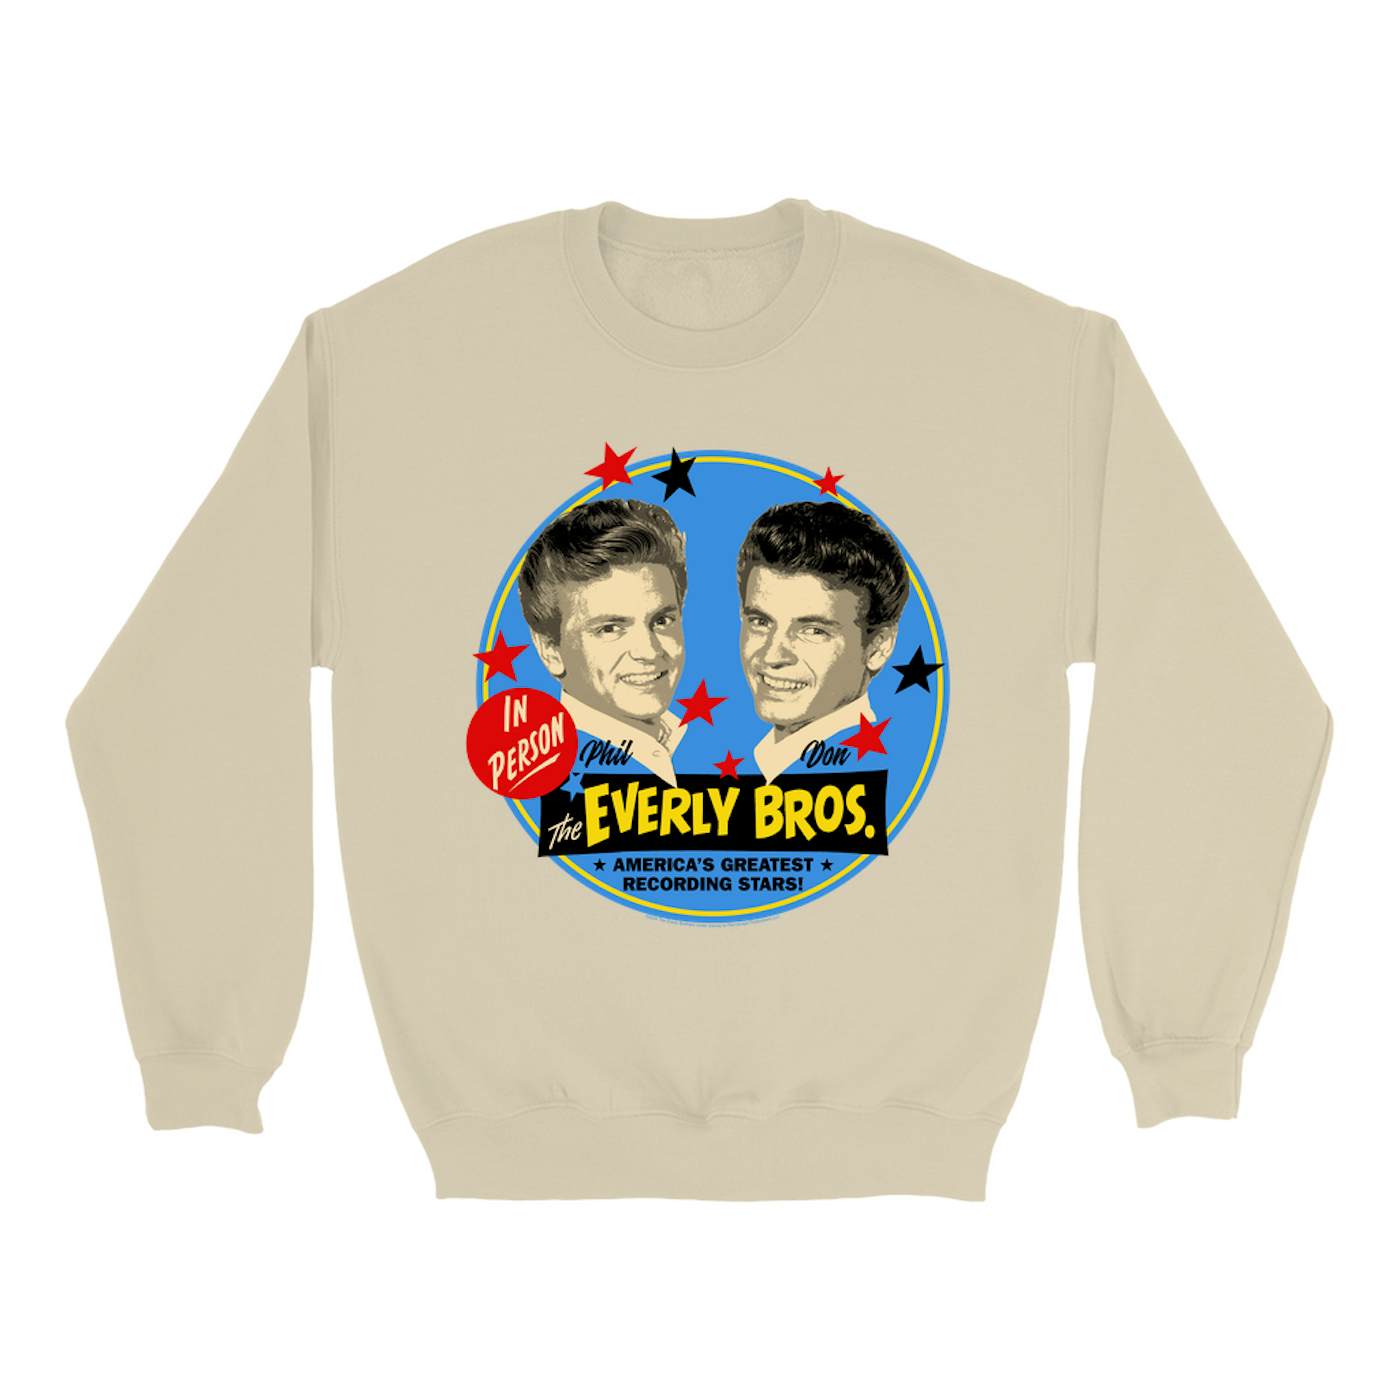 The Everly Brothers Sweatshirt | America's Greatest Recording Stars Promotion Image The Everly Brothers Sweatshirt